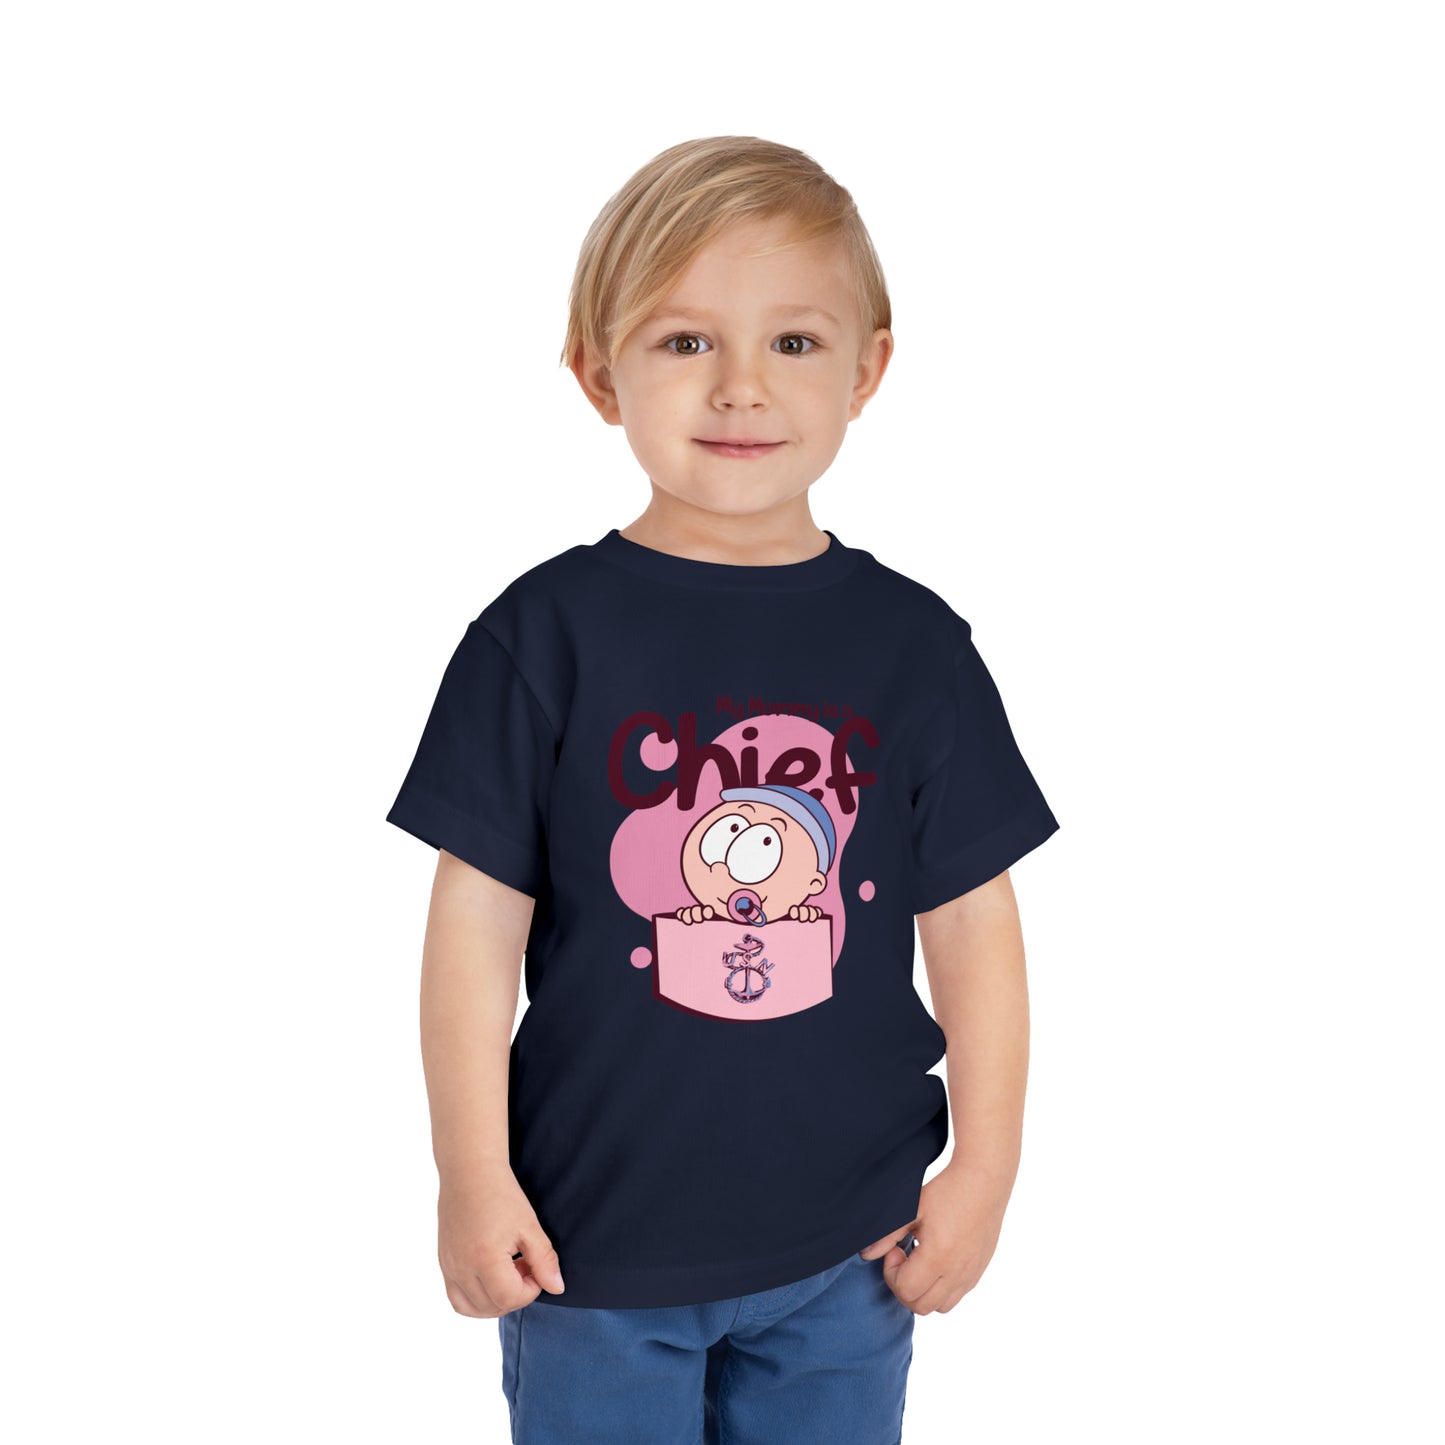 My Mommy is a Chief Toddler Short Sleeve Tee